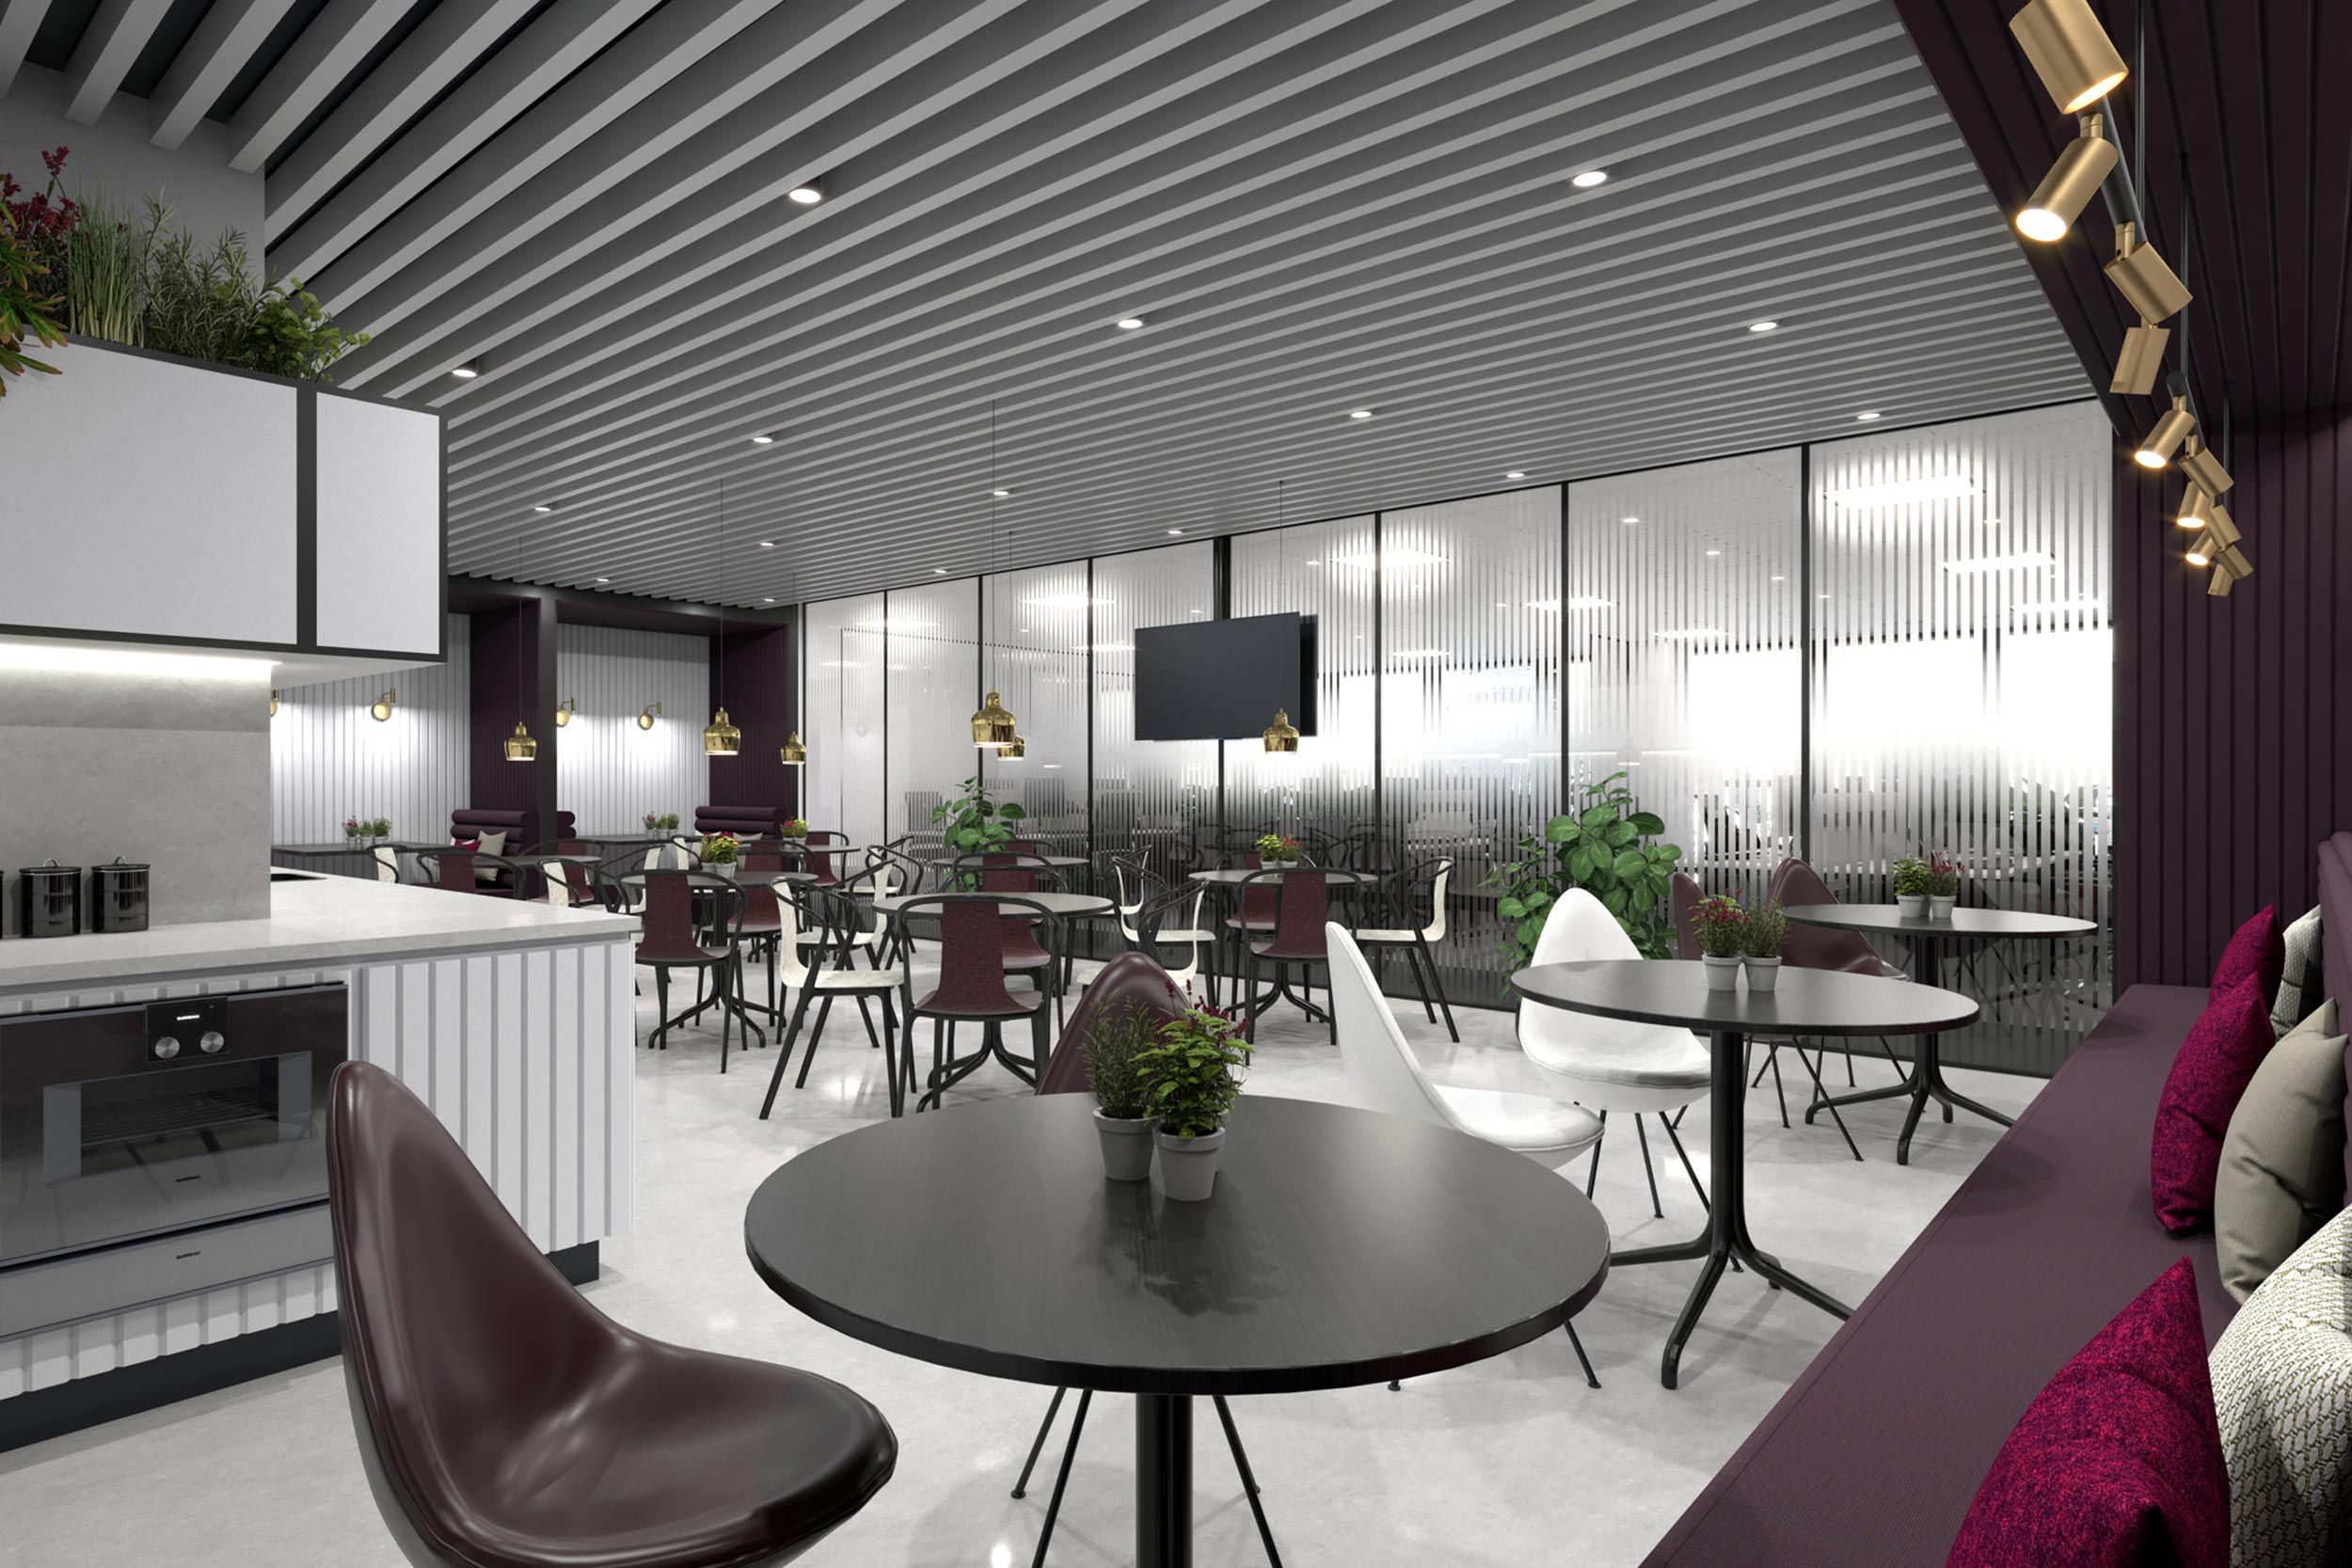 Ocean Network Express Commercial Property Development Office Interior Designer CGI Concept Visual by Unit4, London